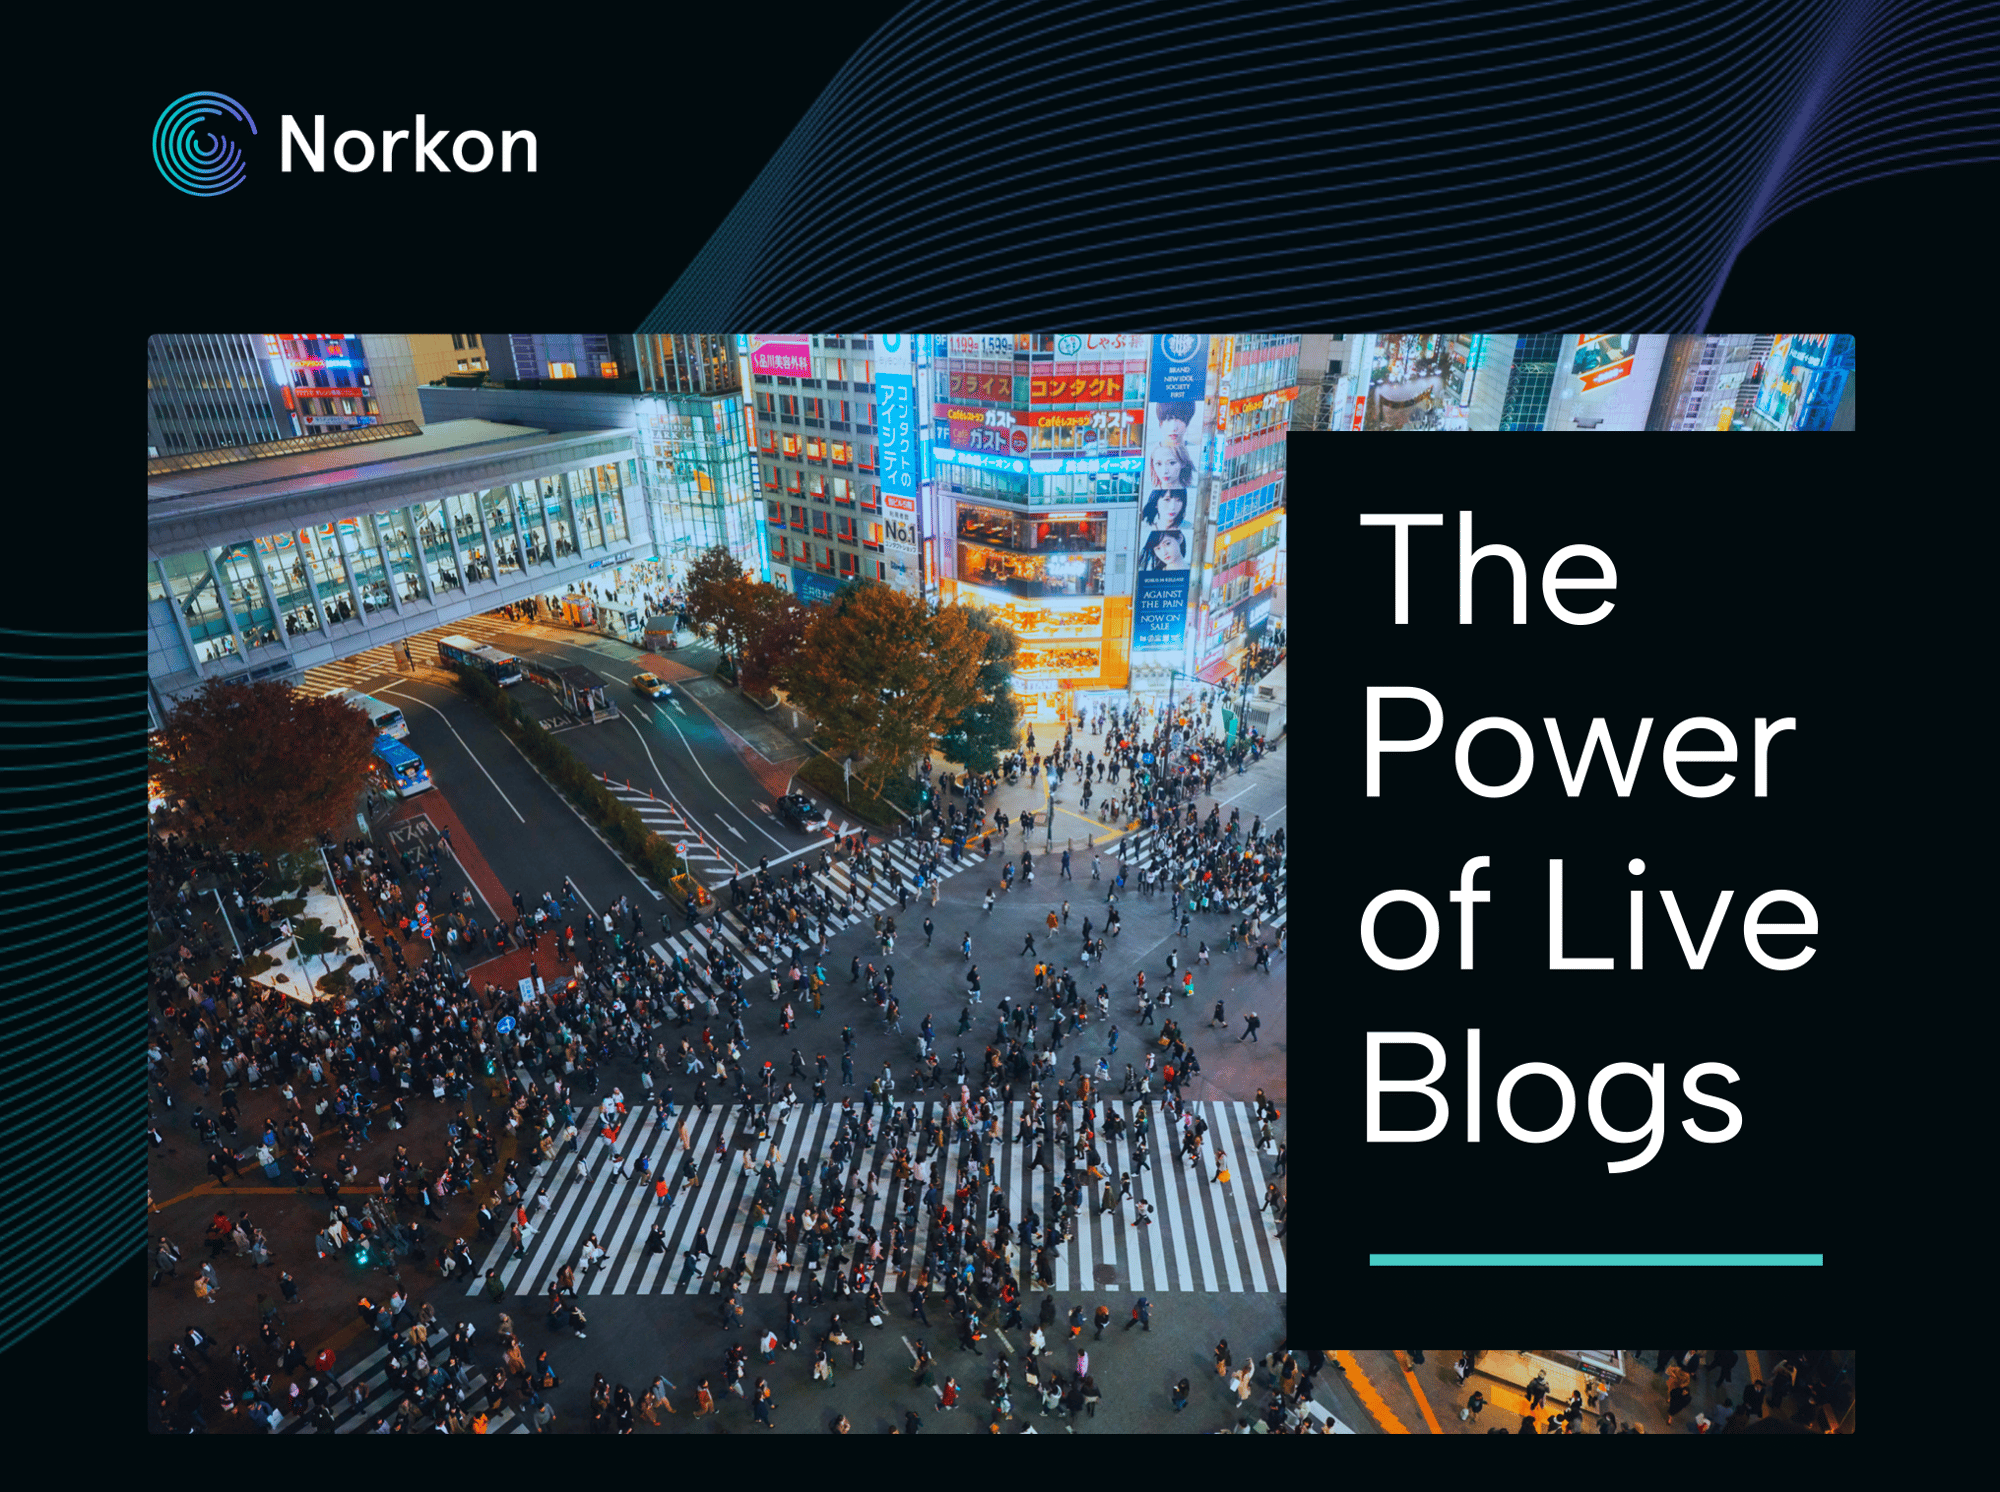 The power of live blogs - image